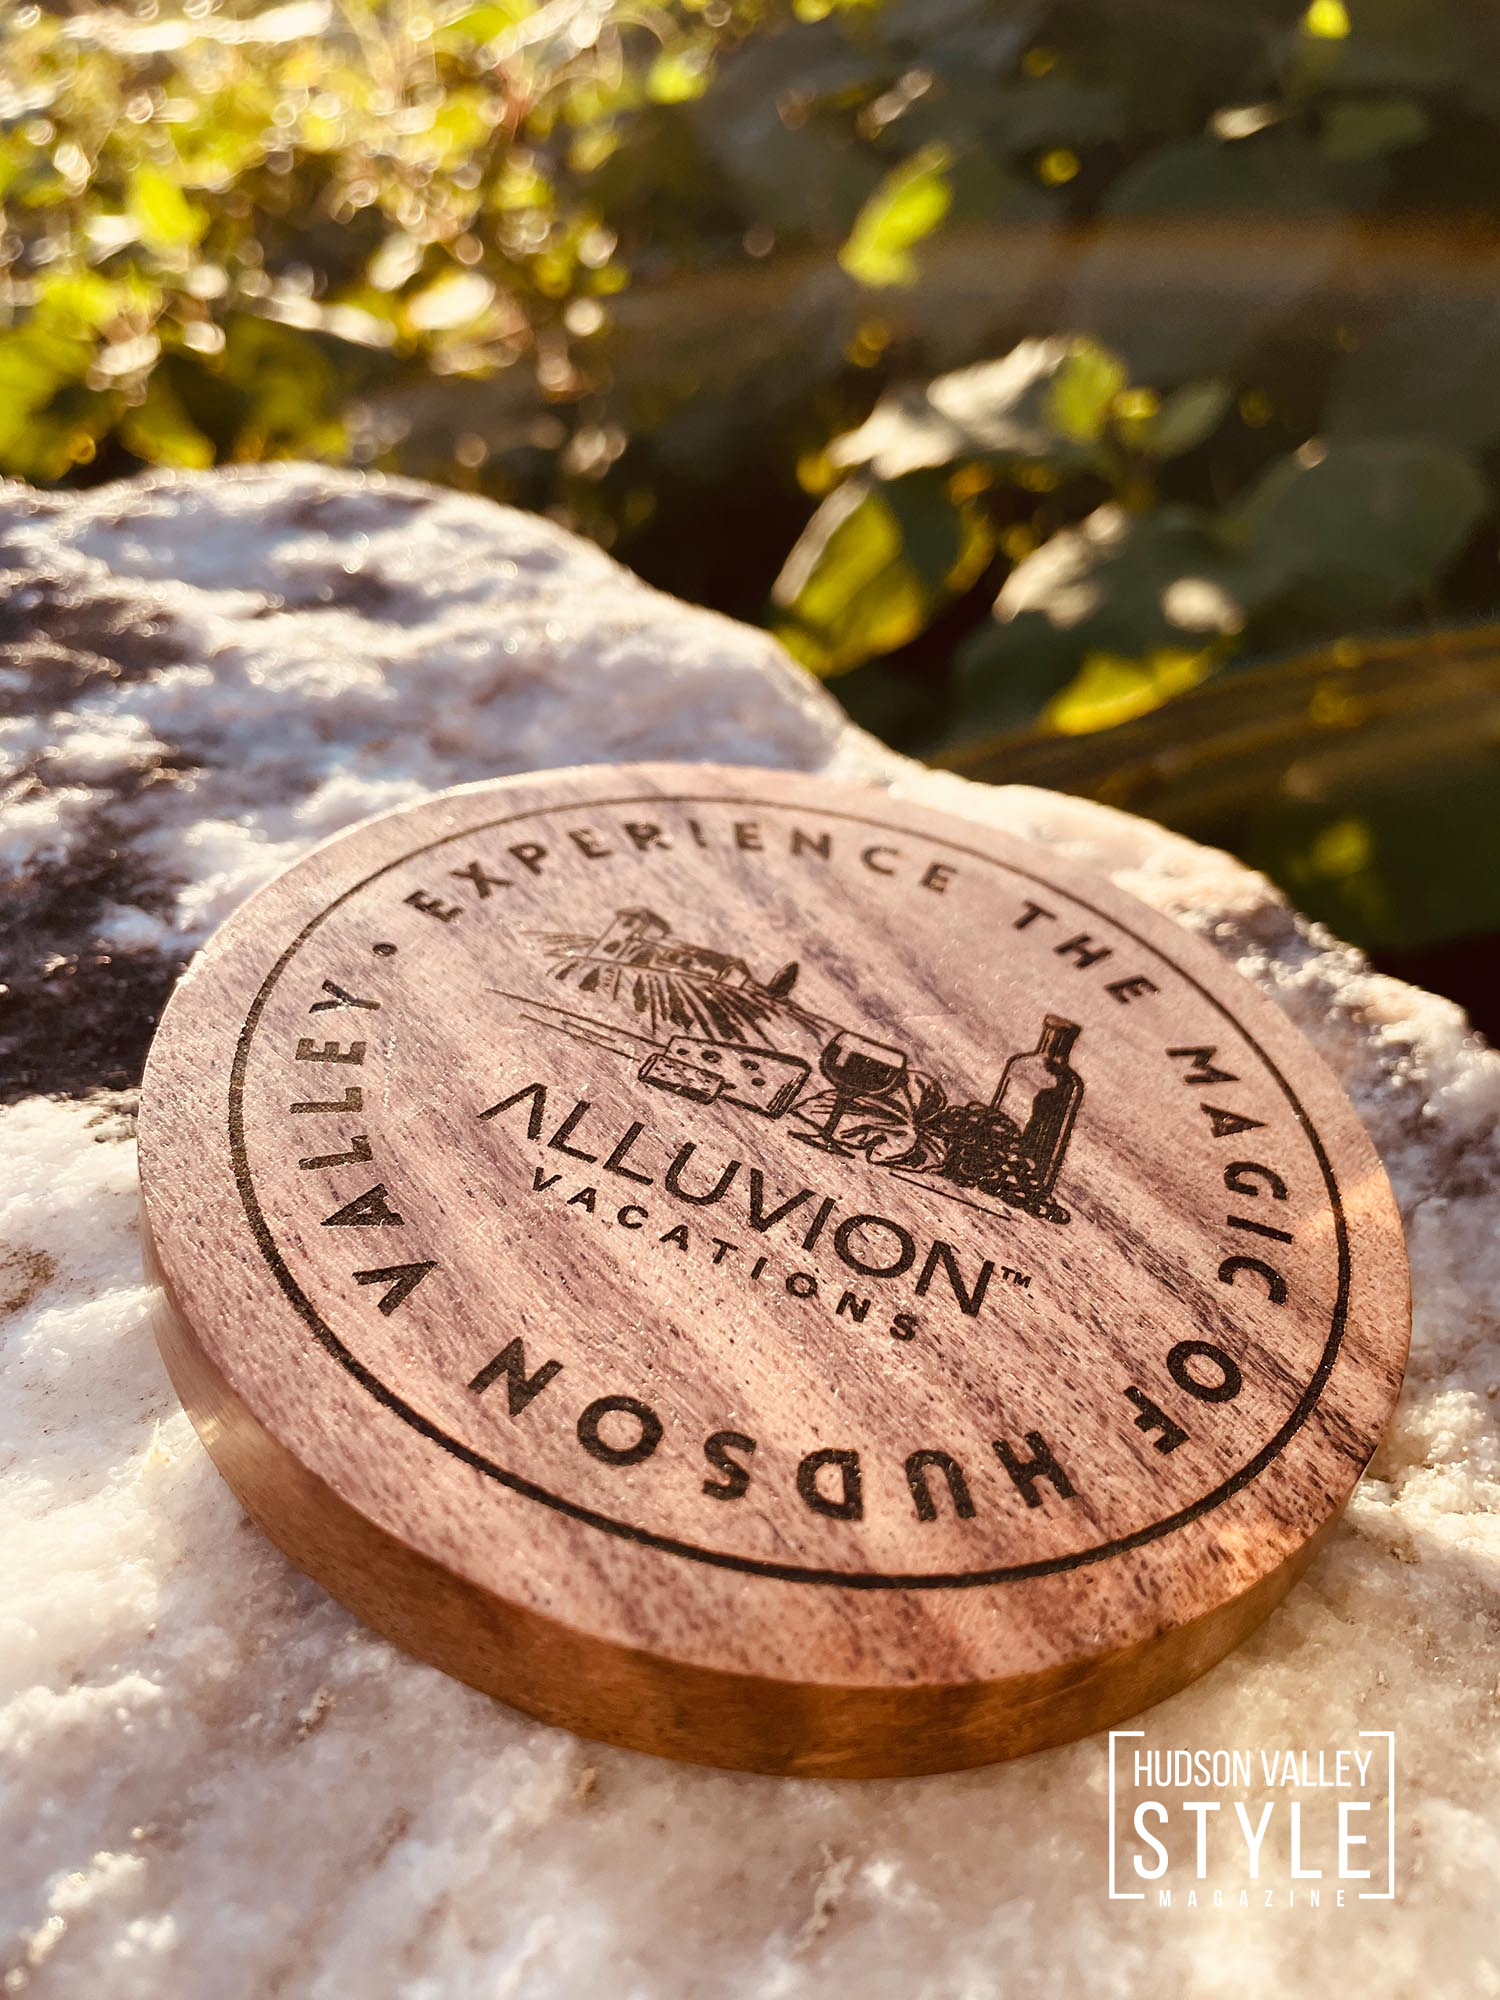 Exploring LGBTQ-Friendly Travel in the Hudson Valley and Catskills: Wellness Getaways, Charming Towns, and More! – Presented by Alluvion Vacations